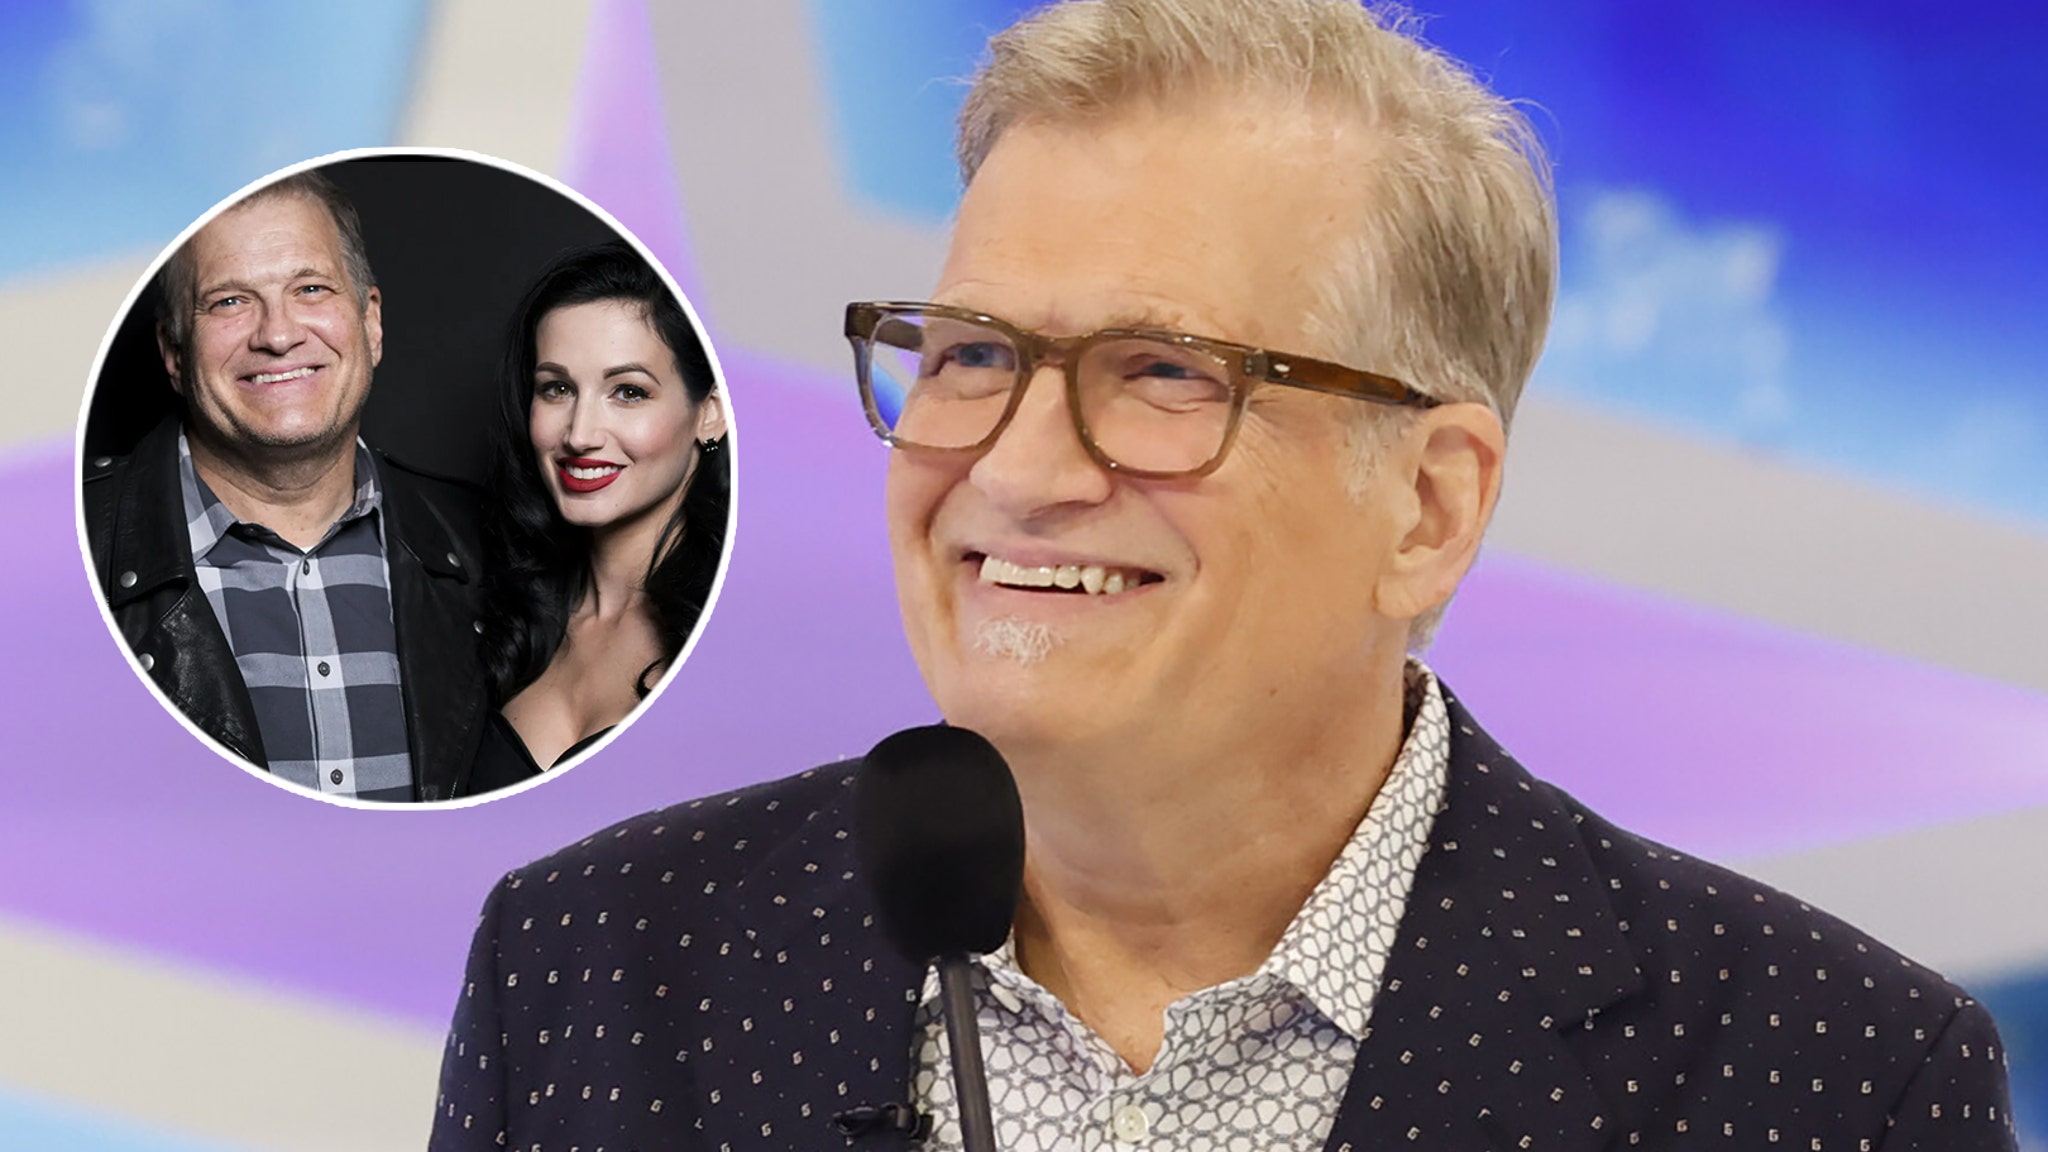 Drew Carey Finds Closure Over Former Fiancee's Dying After Her Killer's Sentence